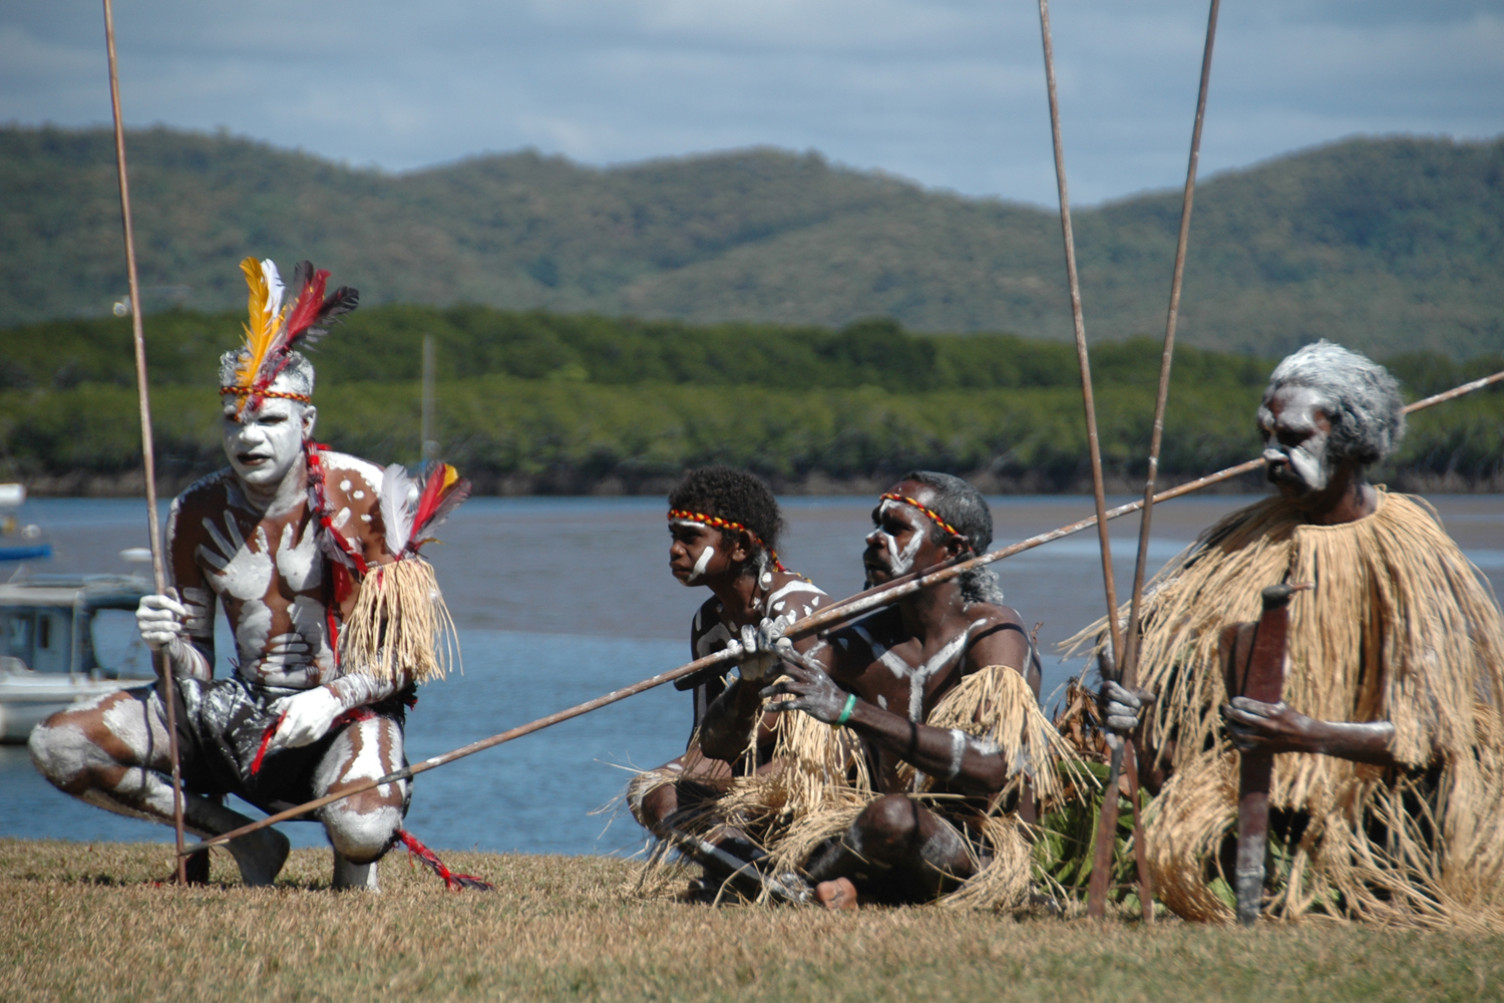 First Nations arts and culture will be on display during the Cooktown Discovery Festival’s Captain Cook landing re-enactment.